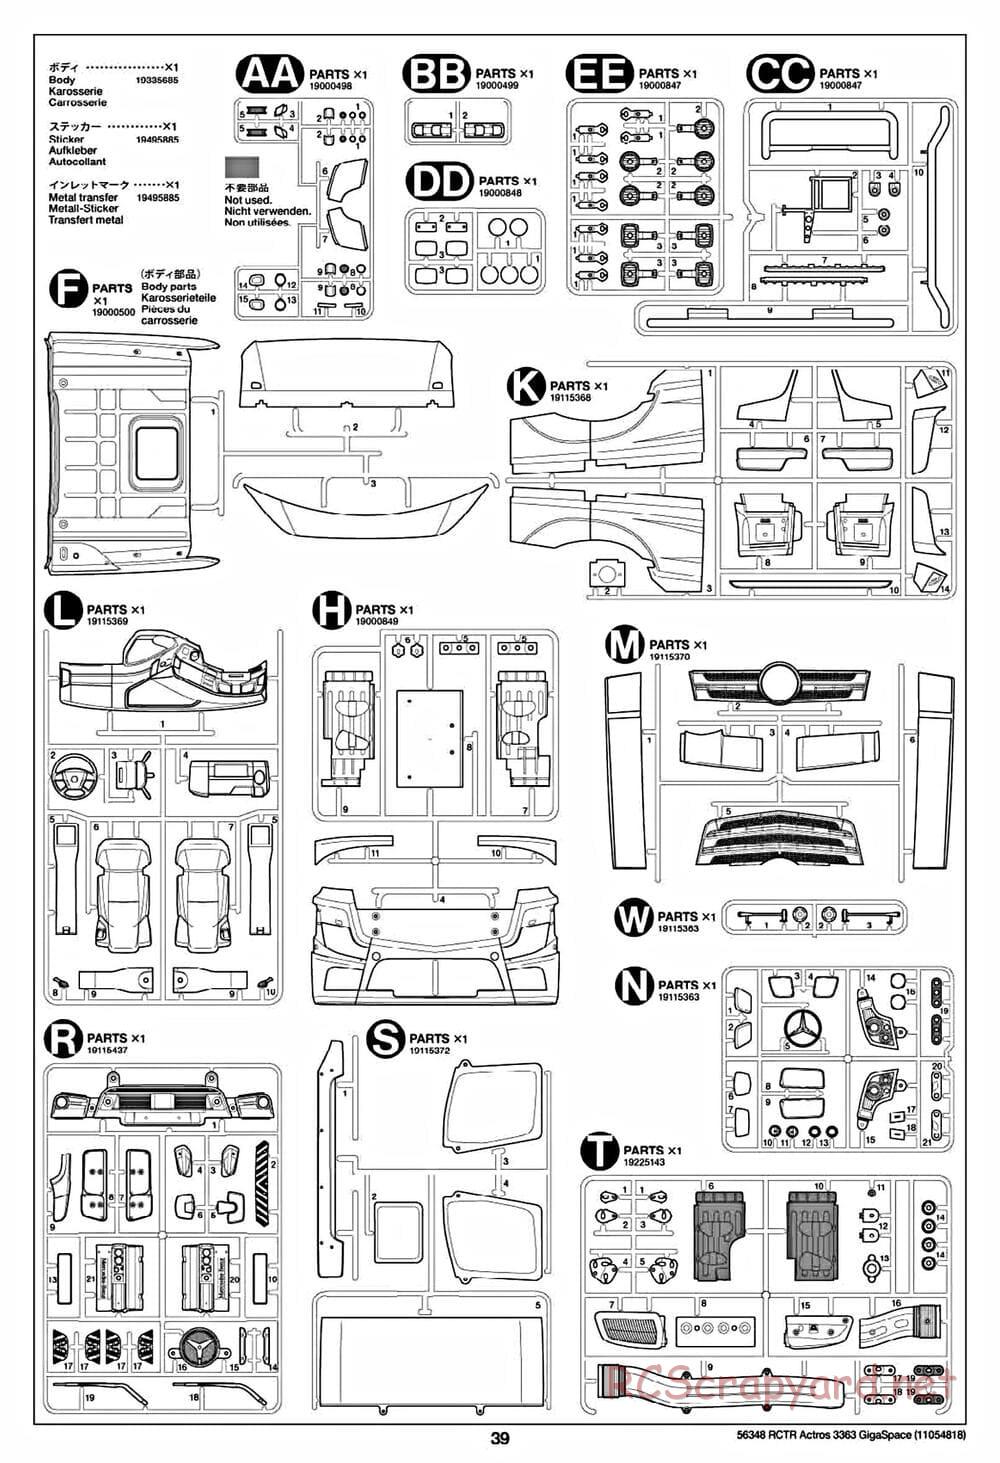 Tamiya - Mercedes-Benz Actros 3363 6x4 GigaSpace Tractor Truck Chassis - Manual - Page 39